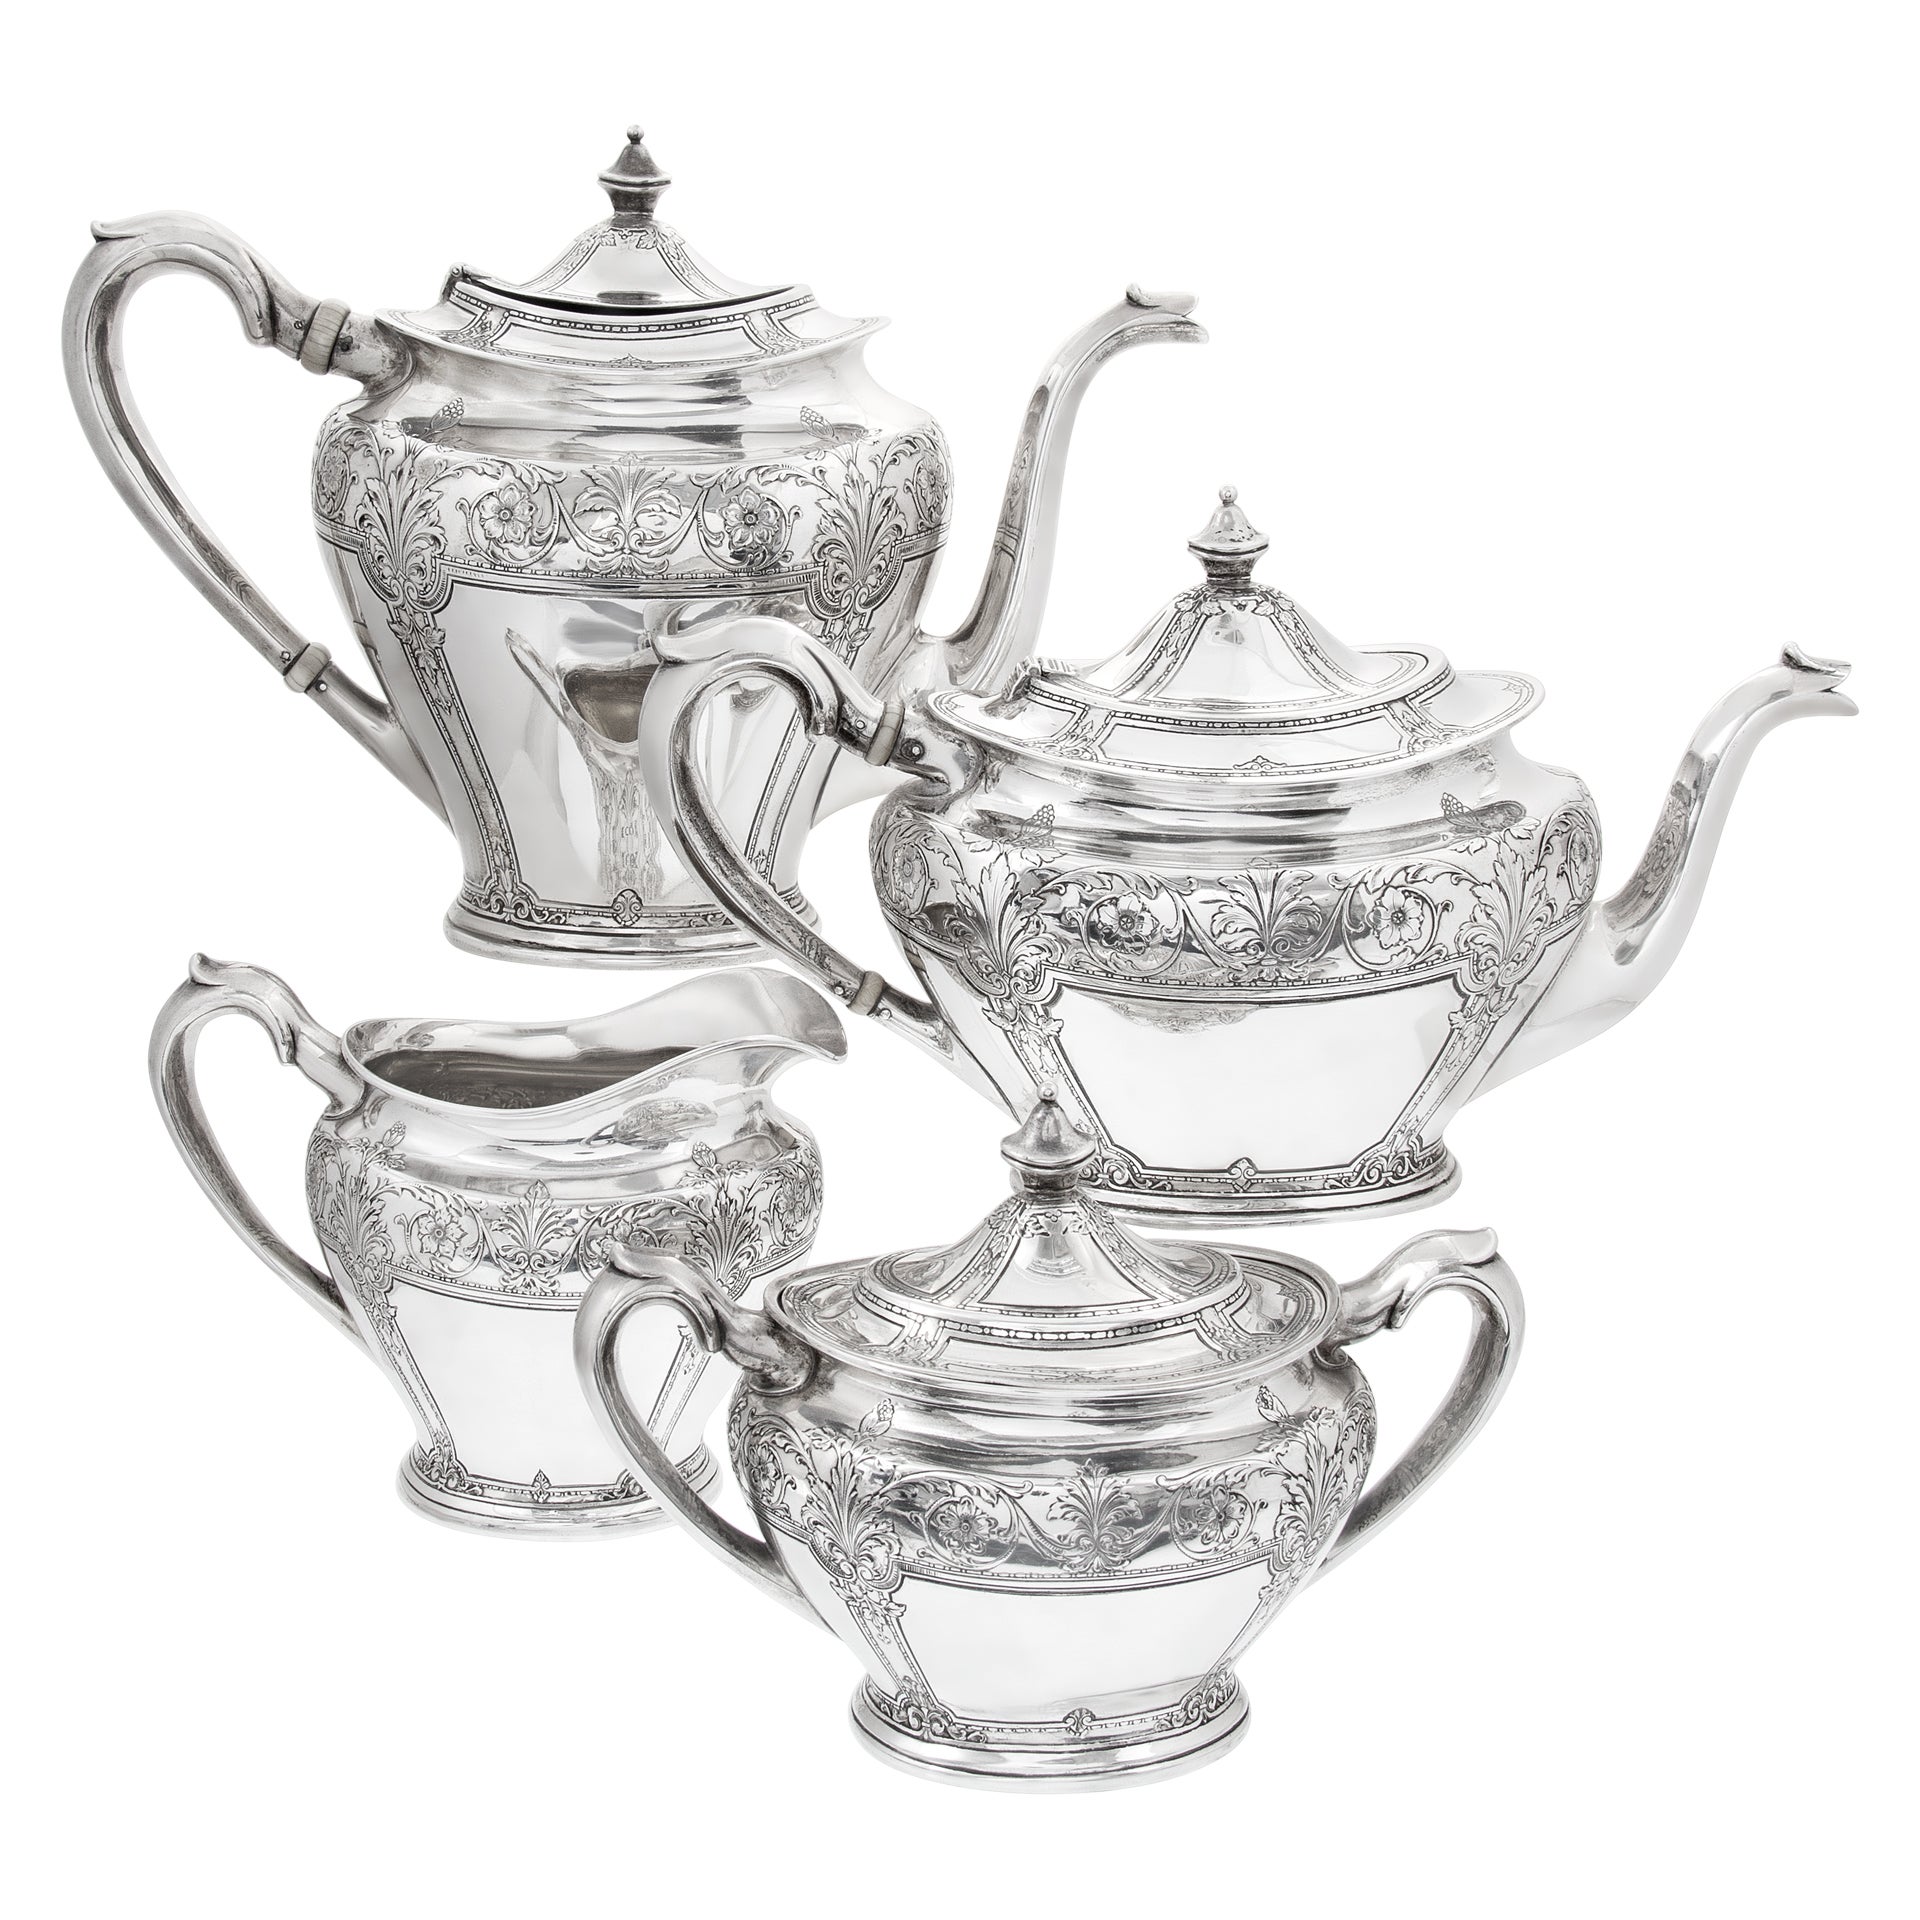 Victorian 4 Pieces Tea/Coffee Sterling Silver Set, by the Lebkuecher & Co